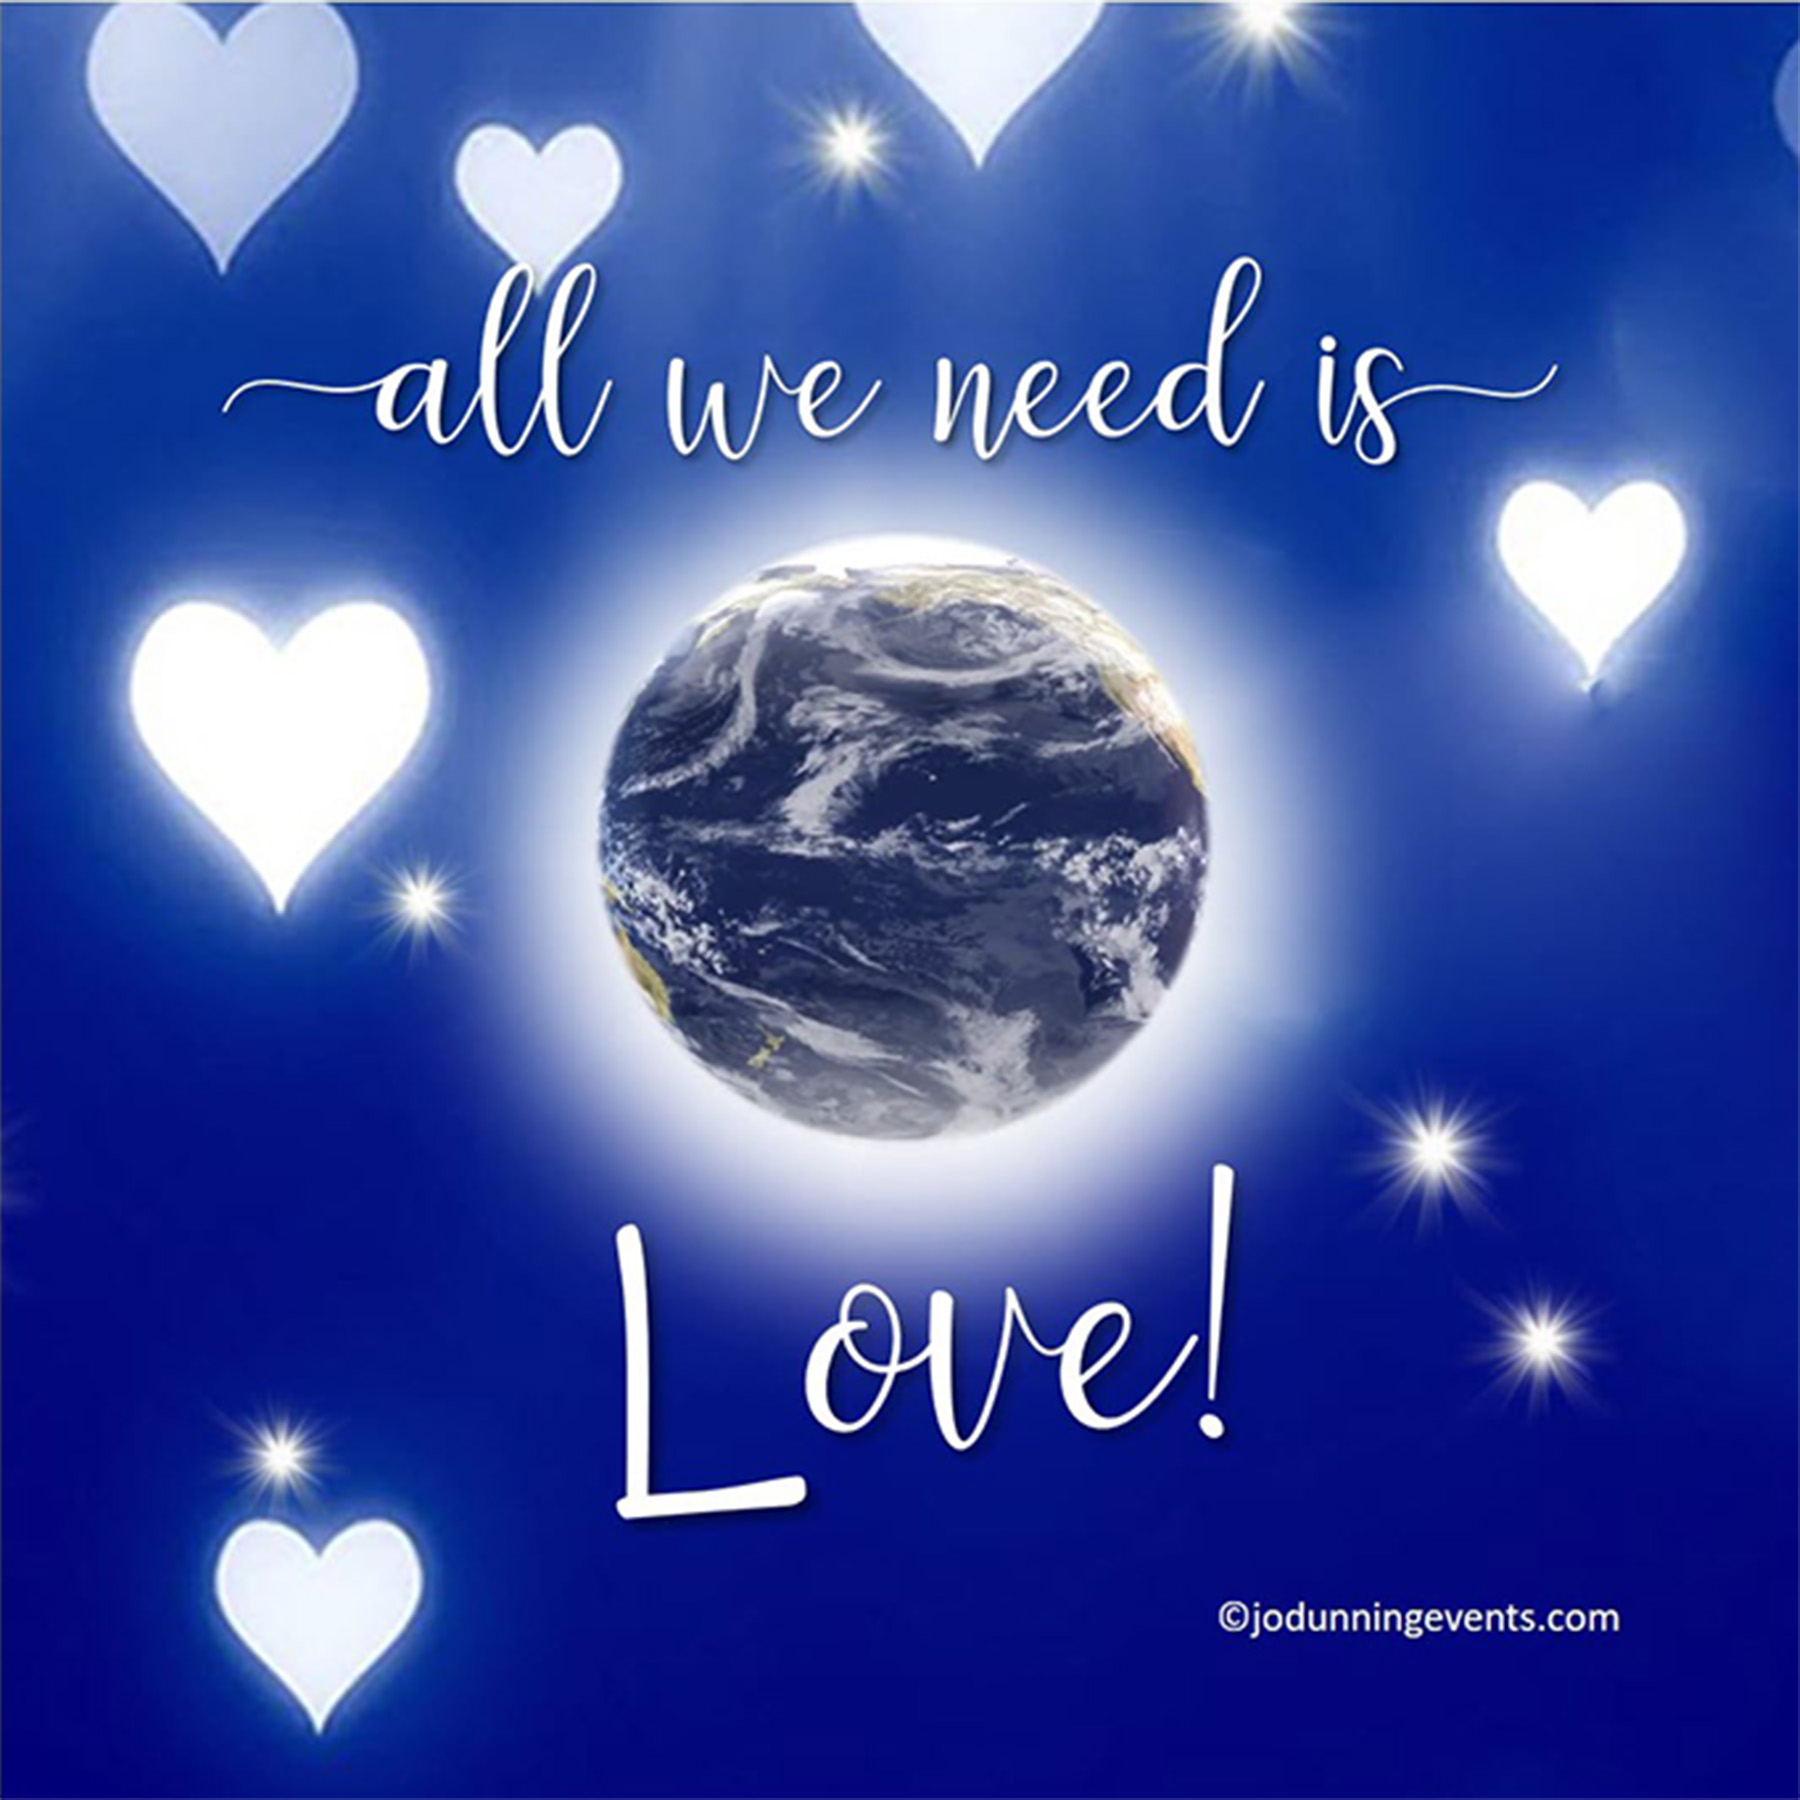 All We Need Is Love - Gems from Jo